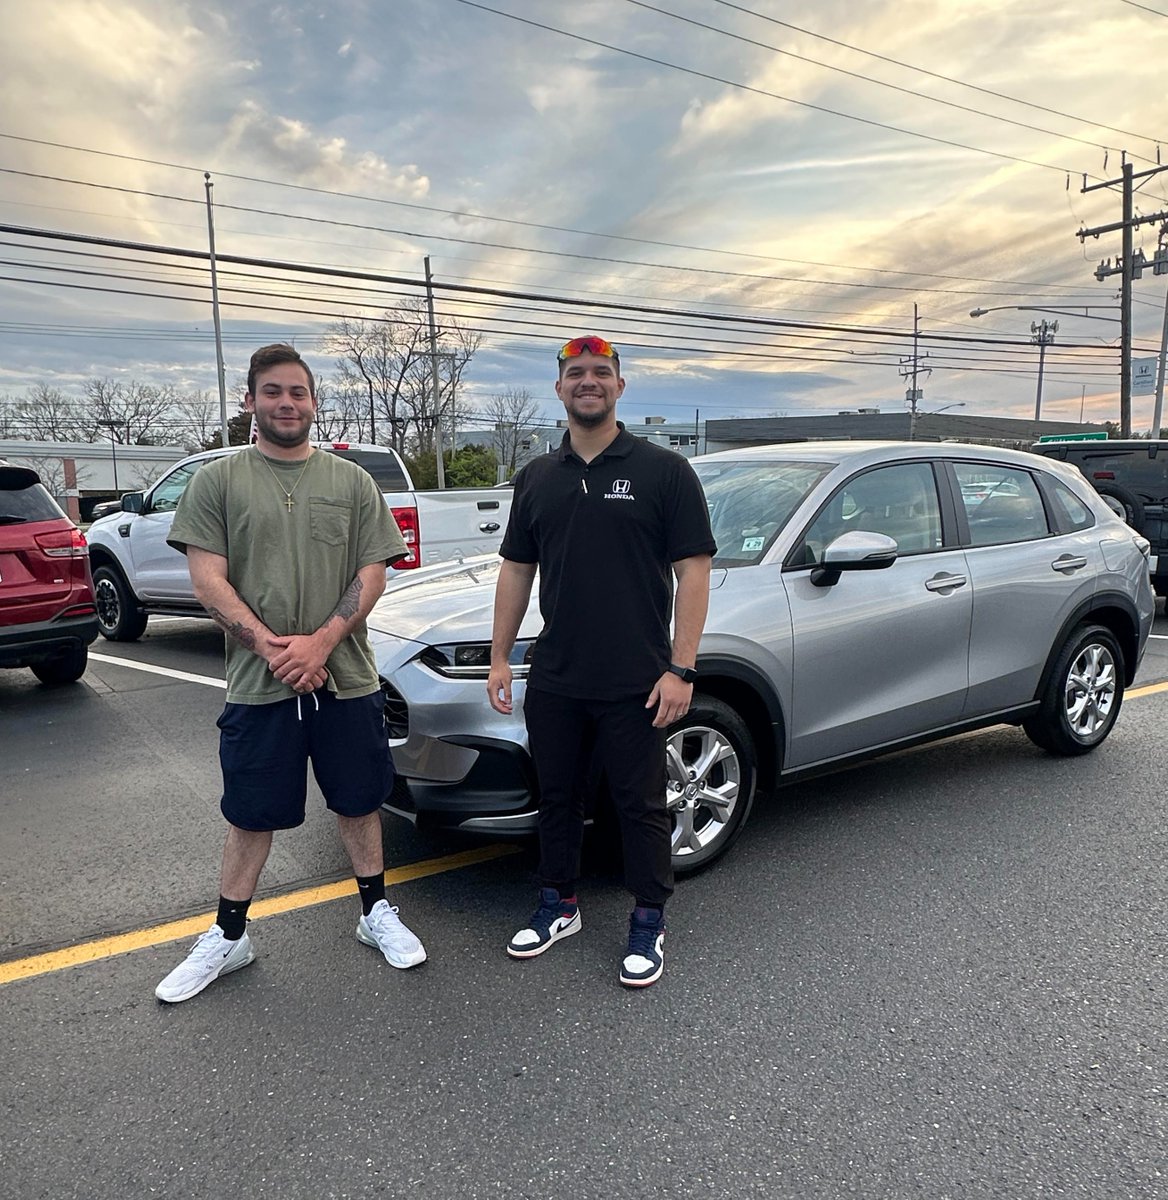 Another happy customer drives off with a smile! 😁  
Welcome to the Honda of Toms River family! 🚗✨
.
.
.
#HondaOfTomsRiver #WeAreTR #ItsAllHappeningHere #TomsRiverNJ #TomsRiver #TomsRiverLocal #HondaUSA #BuyNew #HappyDriving #CustomerSatisfaction